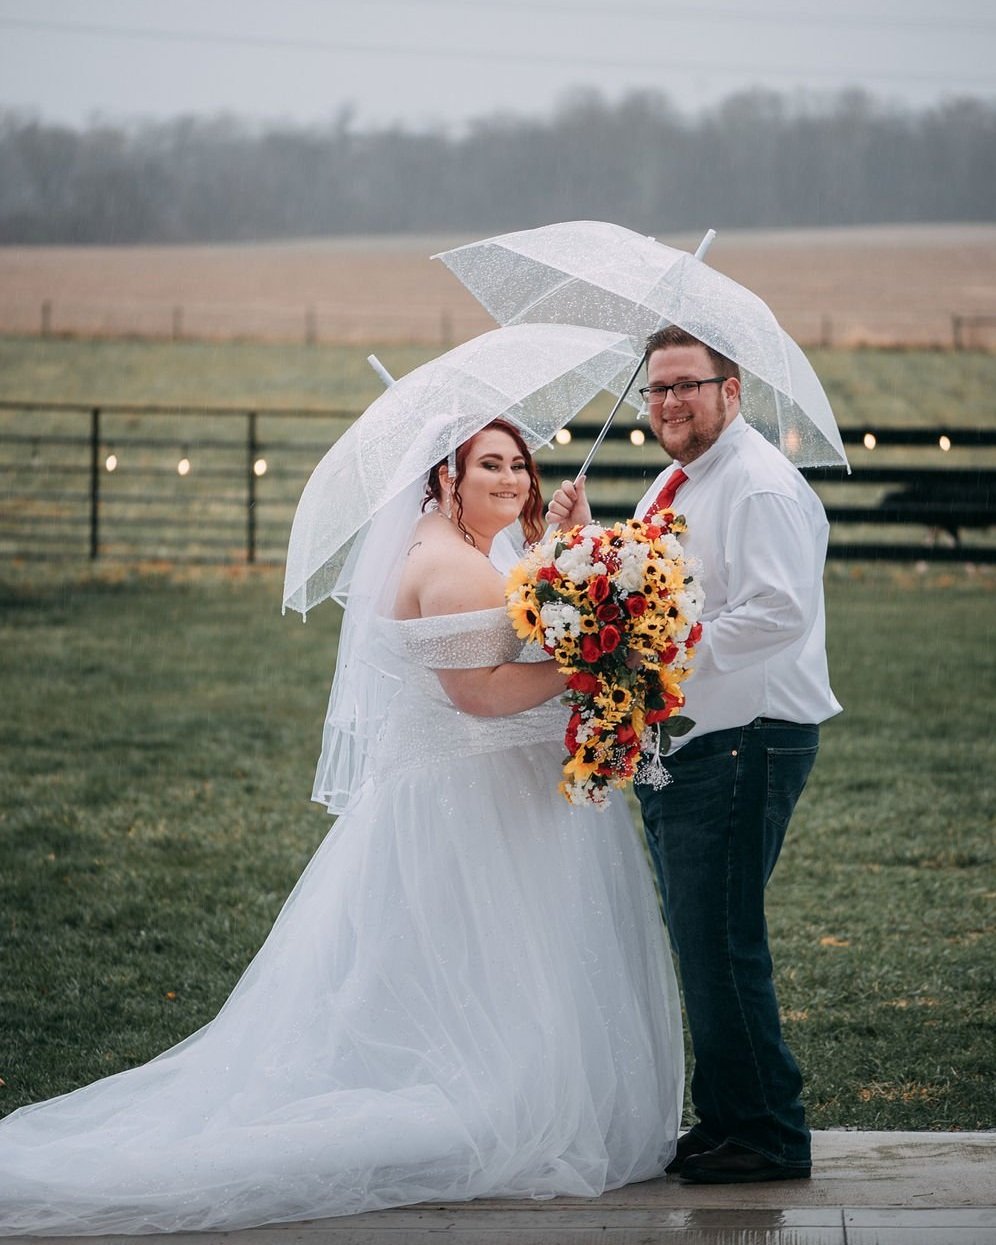 bride and groom in a country rainstorm with umbrellas